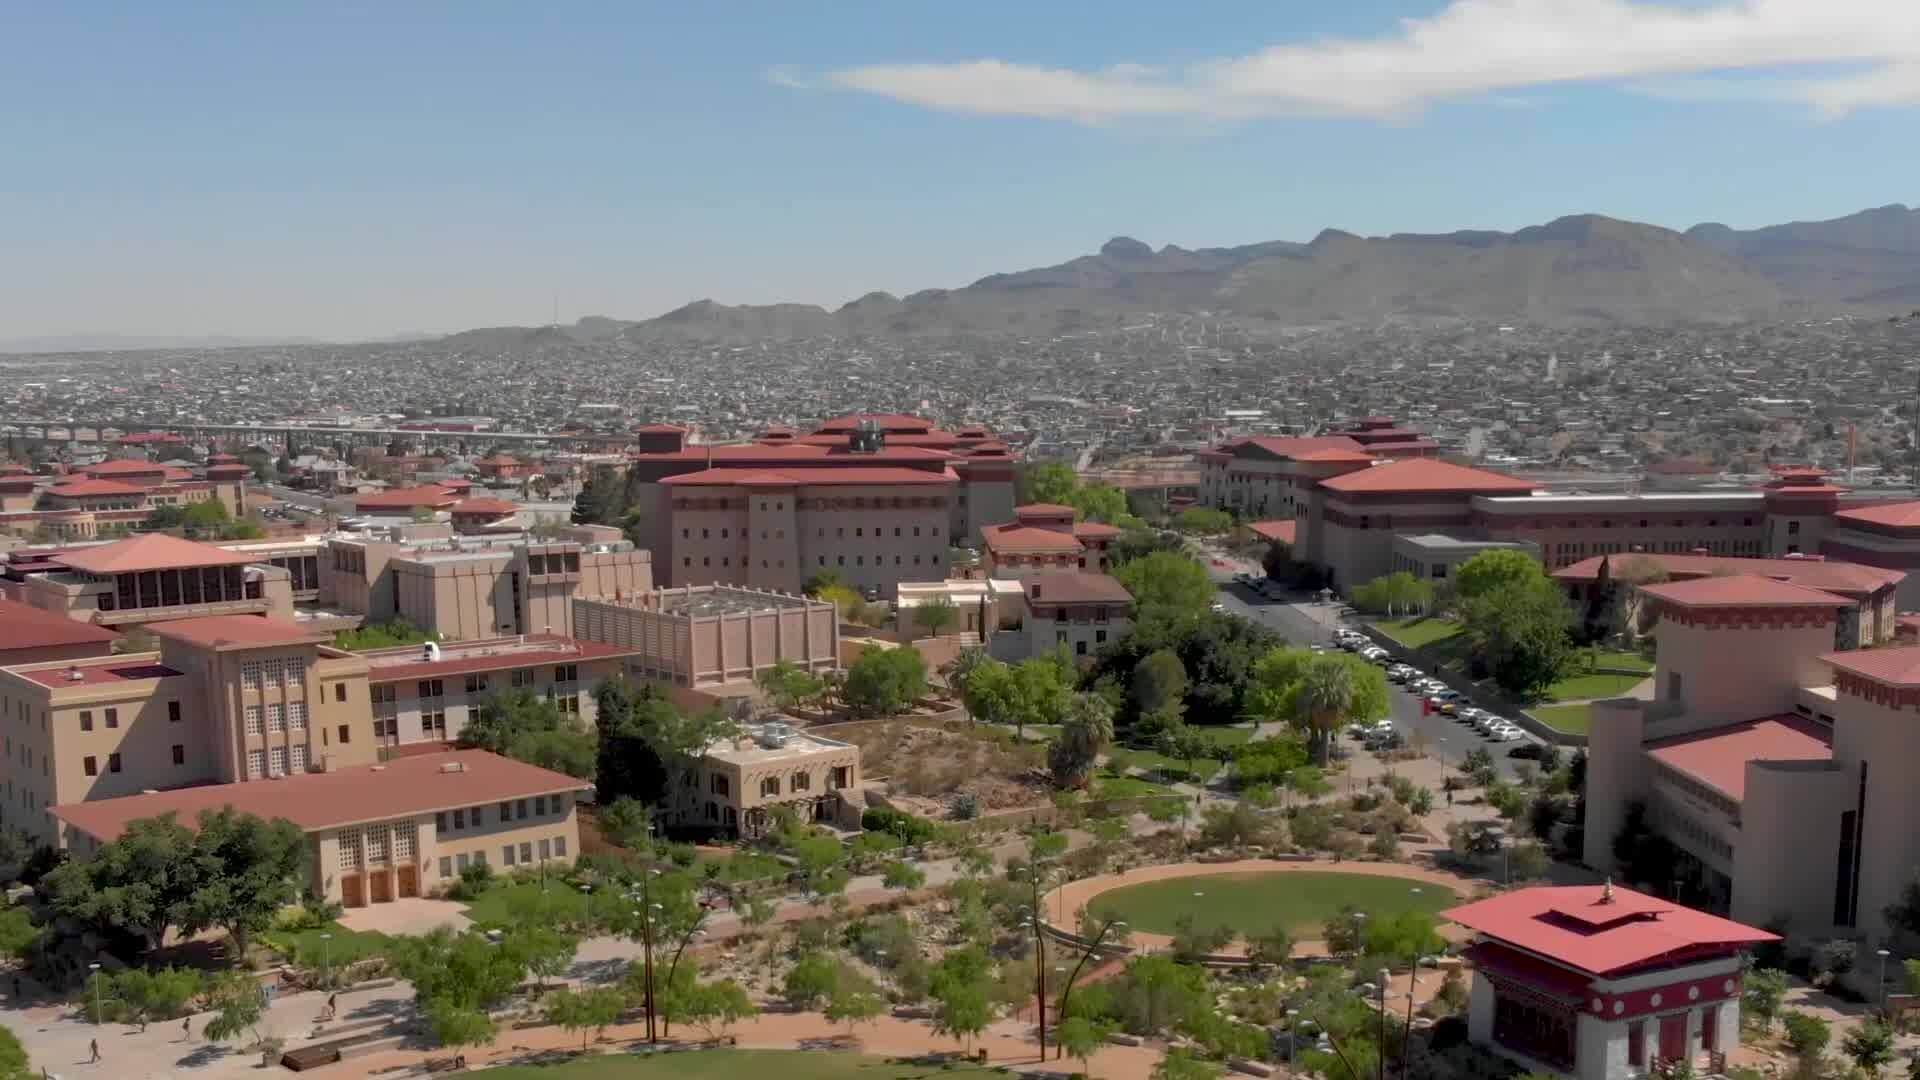 University of Texas at El Paso selects YuJa for Classroom Lecture Capture System and Video Management